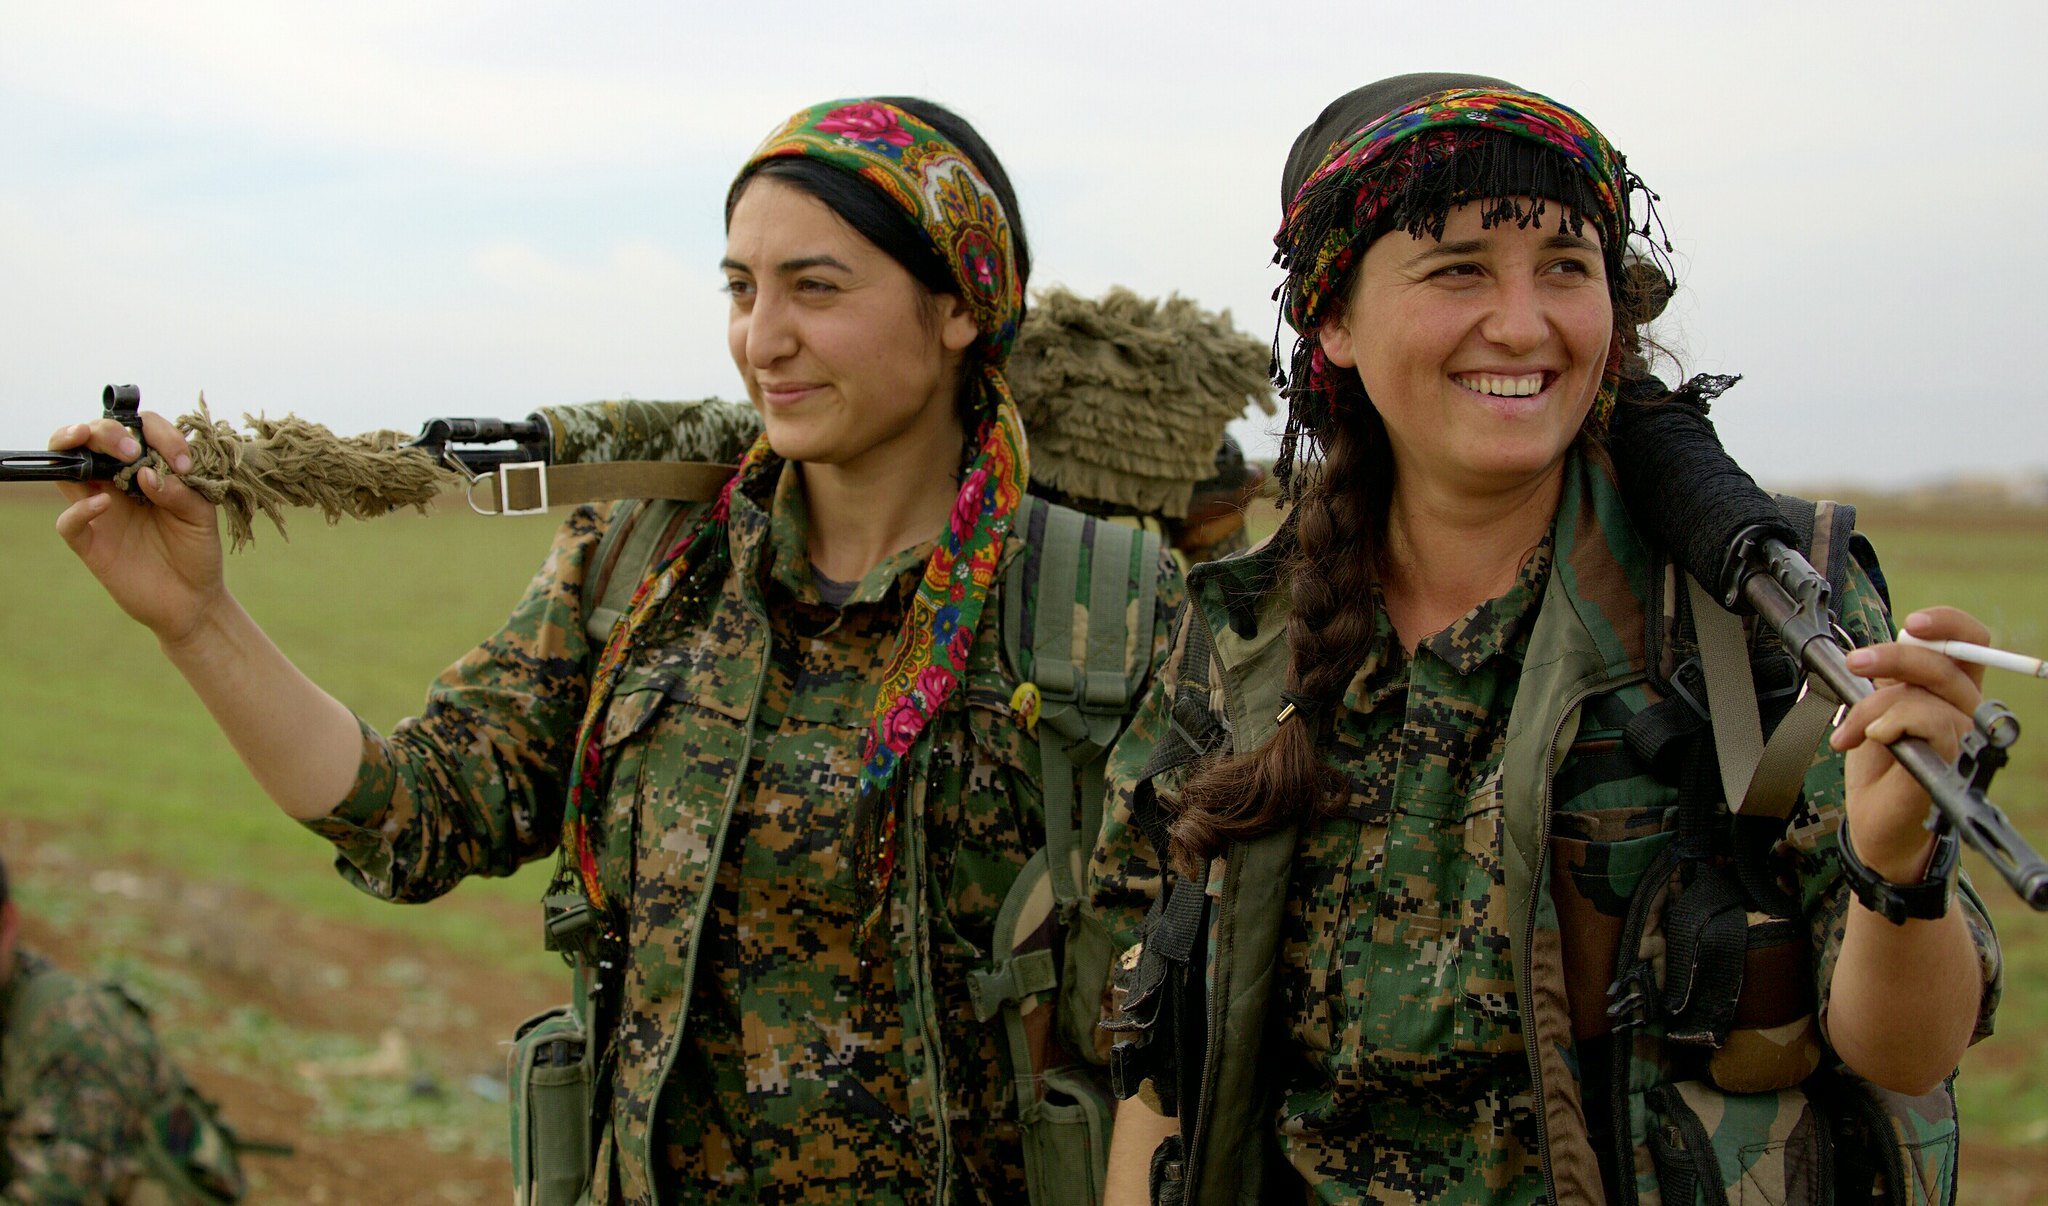 PICTURED: Two Female Kurdish YPG fighters smile for the camera. Kurdish peoples are known to be more progressive than the societies in which they live, which includes their attitudes towards women’s rights. Photo Credit Kurdish struggle, CC 2.0.